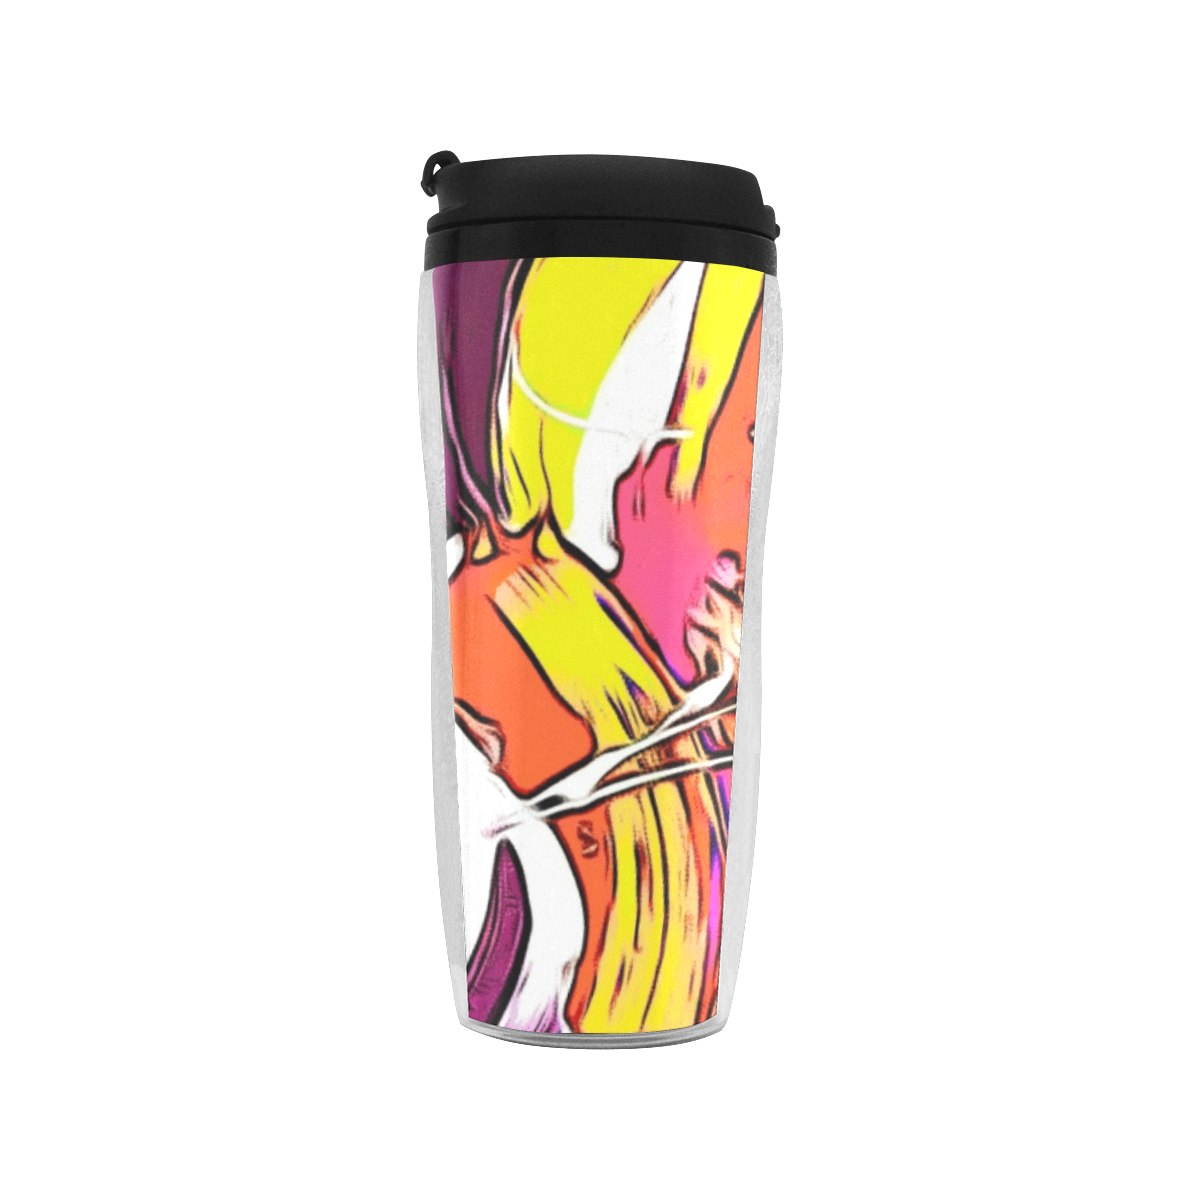 Promise Reusable Coffee Cup (11.8oz)